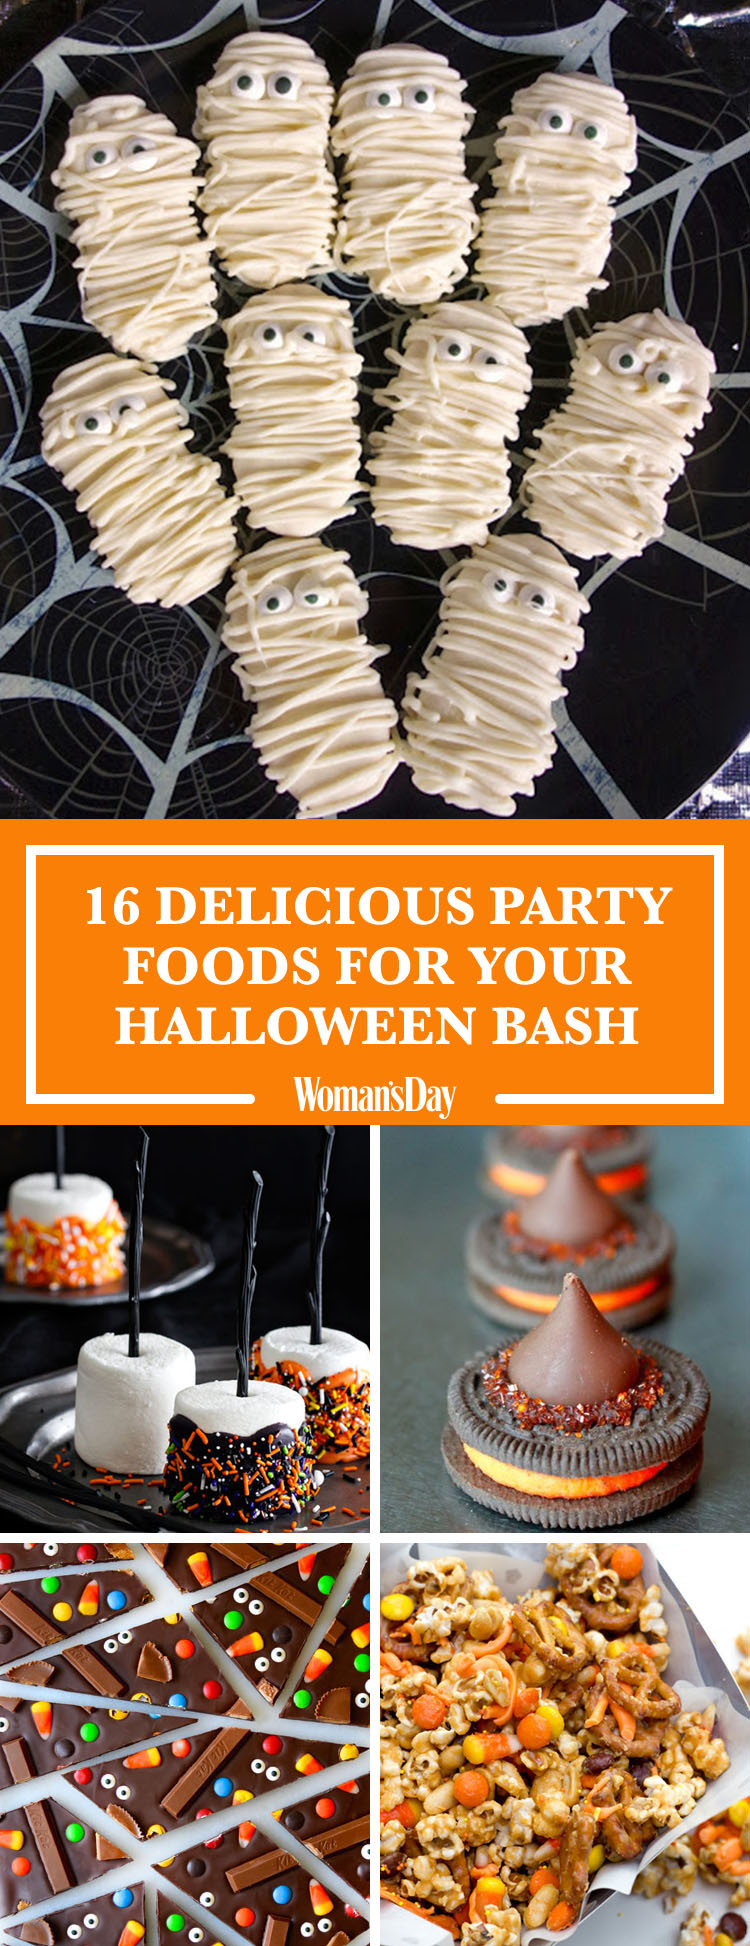 Halloween Recipe Ideas Party
 22 Easy Halloween Party Food Ideas Cute Recipes for